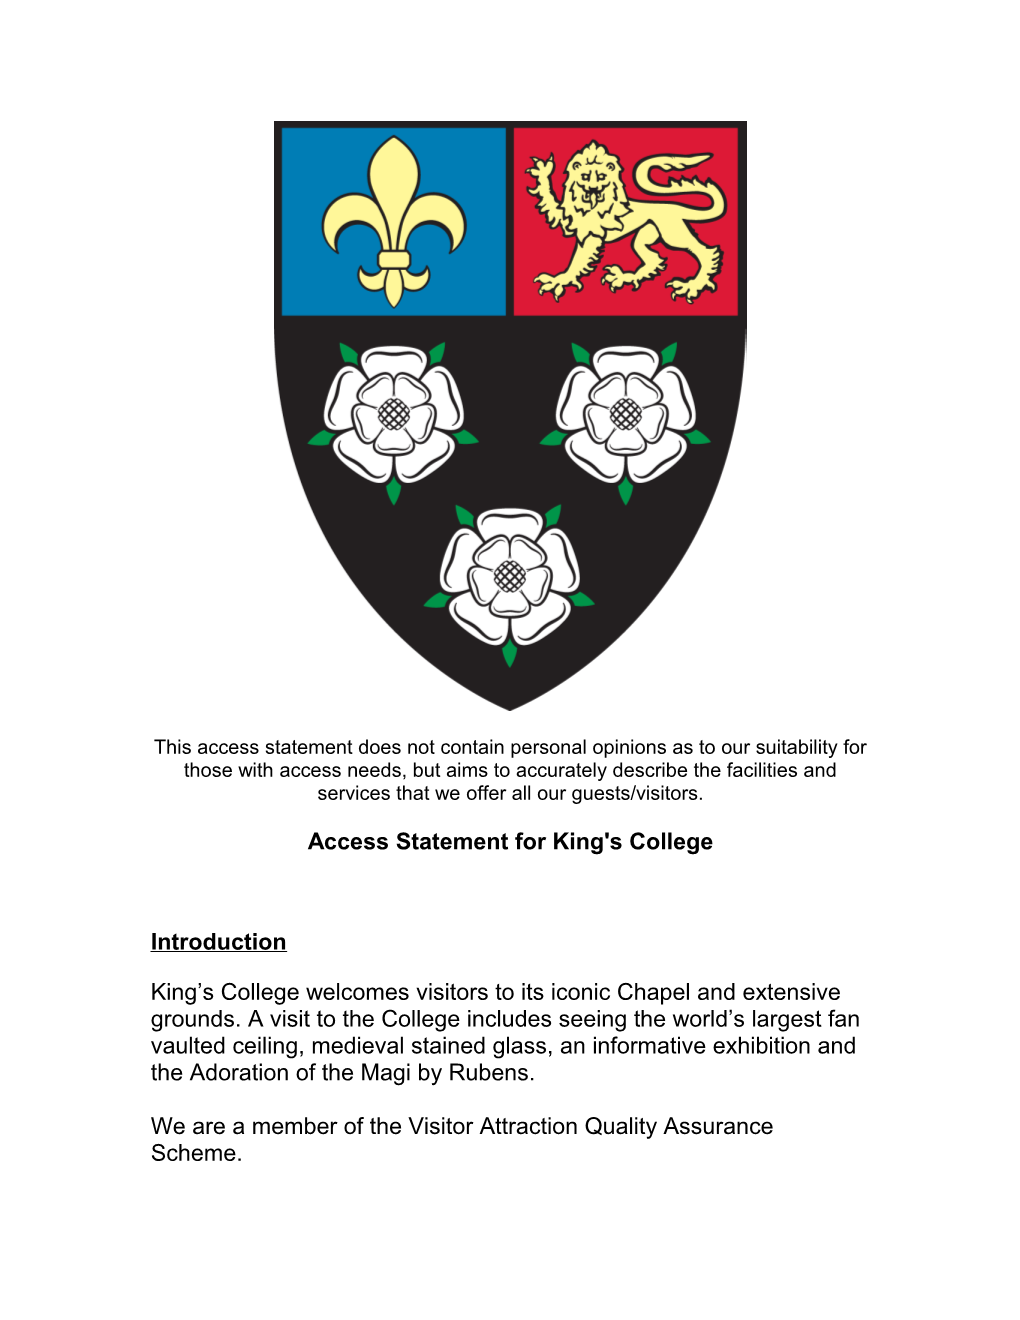 Access Statement for King's College